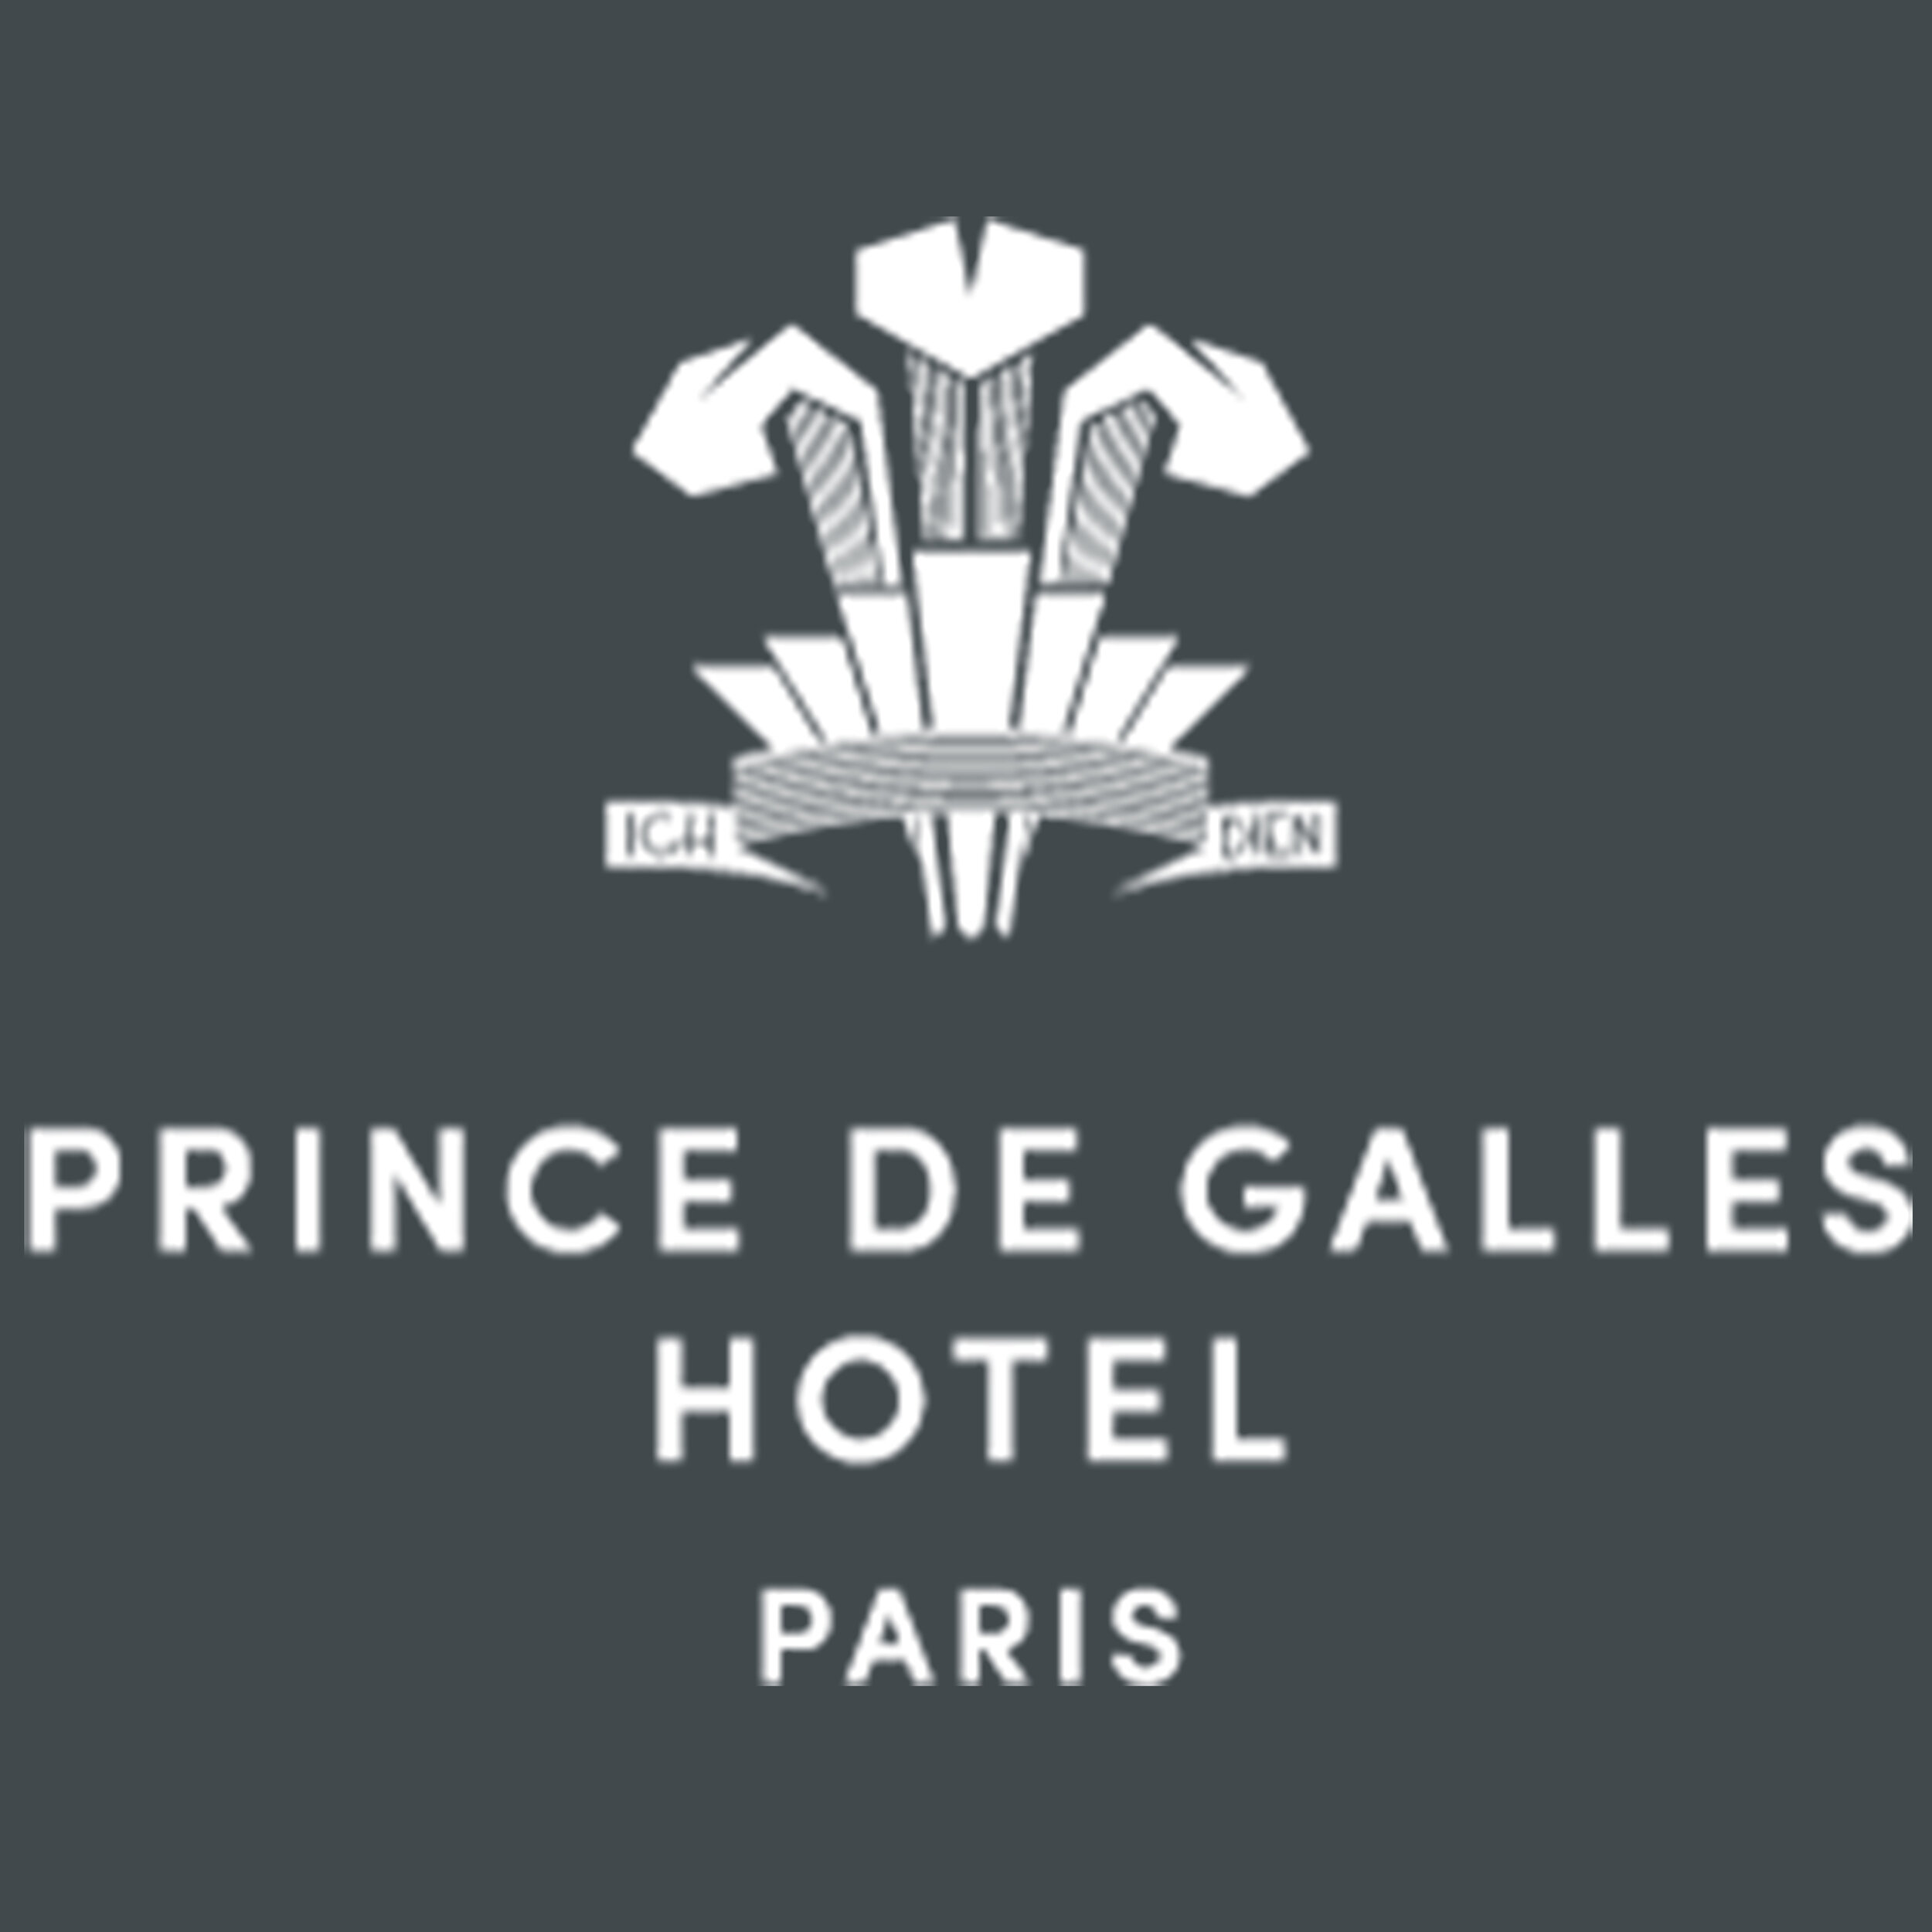 Prince de Galles Hotel fitted.jpg